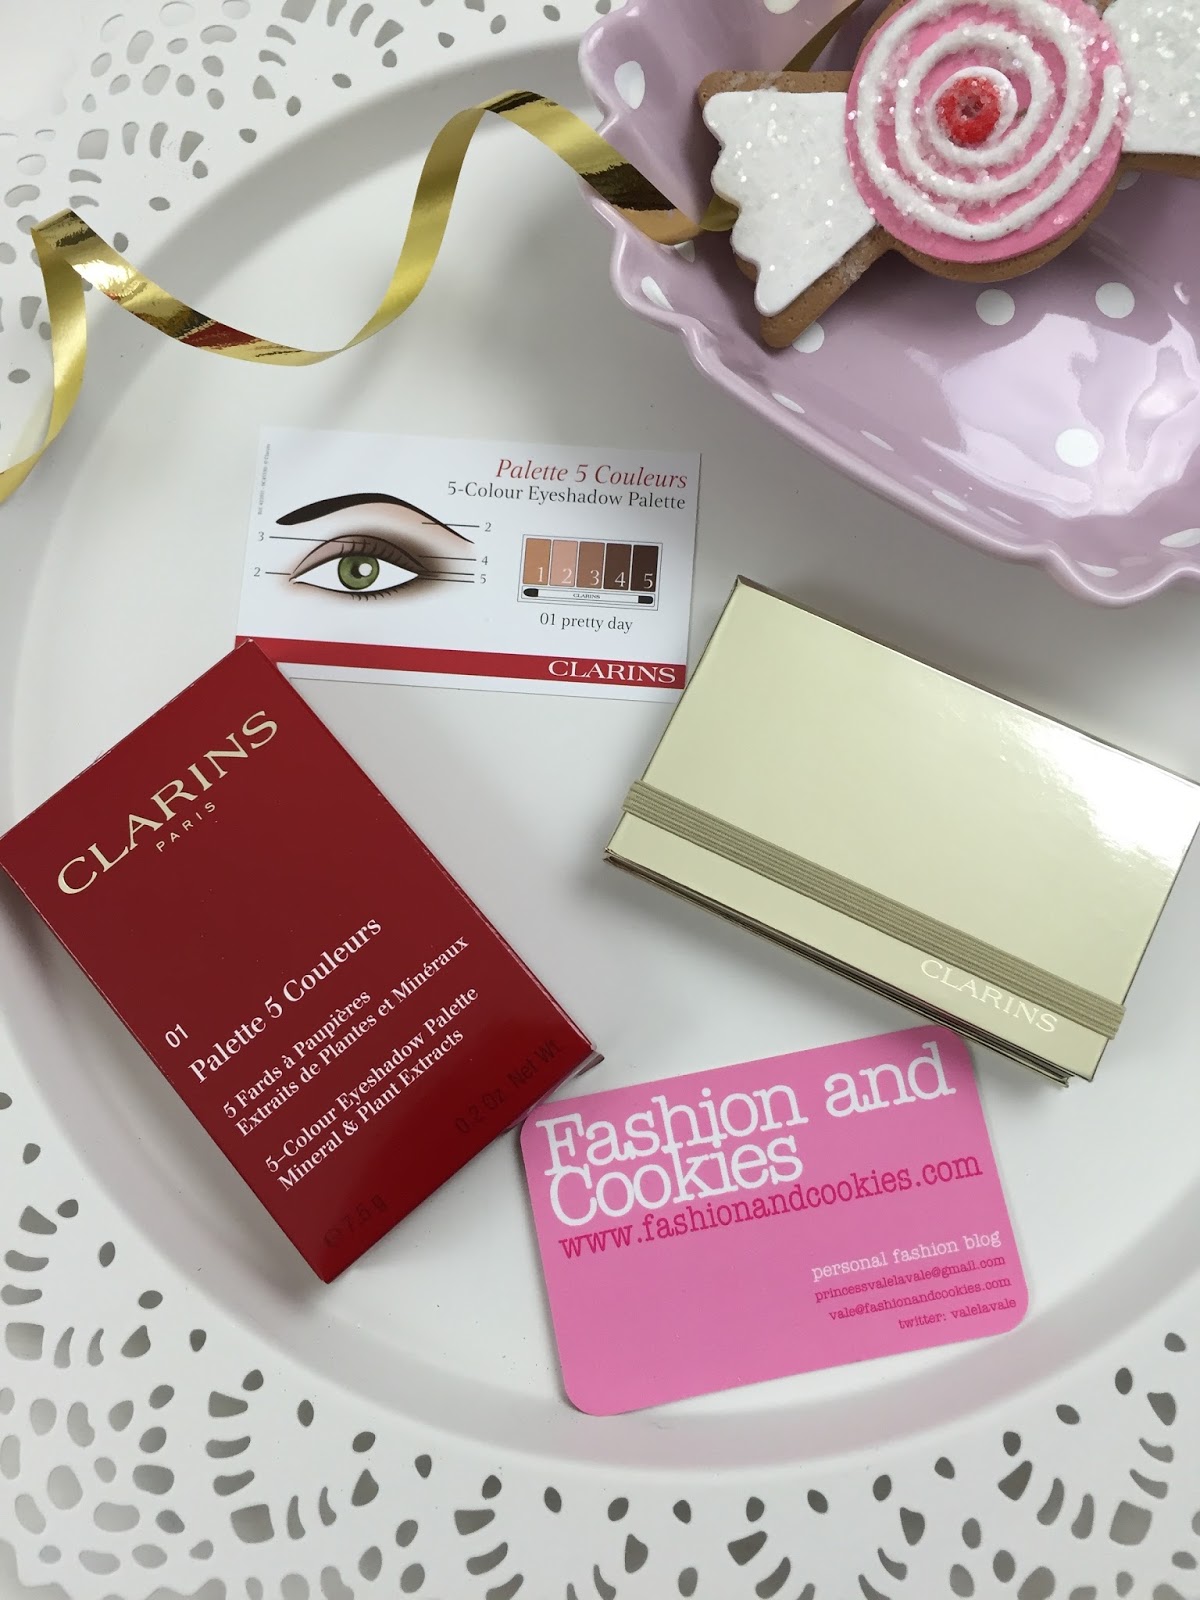 Clarins Pretty Day Eyeshadow palette Limited Edition on Fashion and Cookies fashion blog, fashion blogger style 